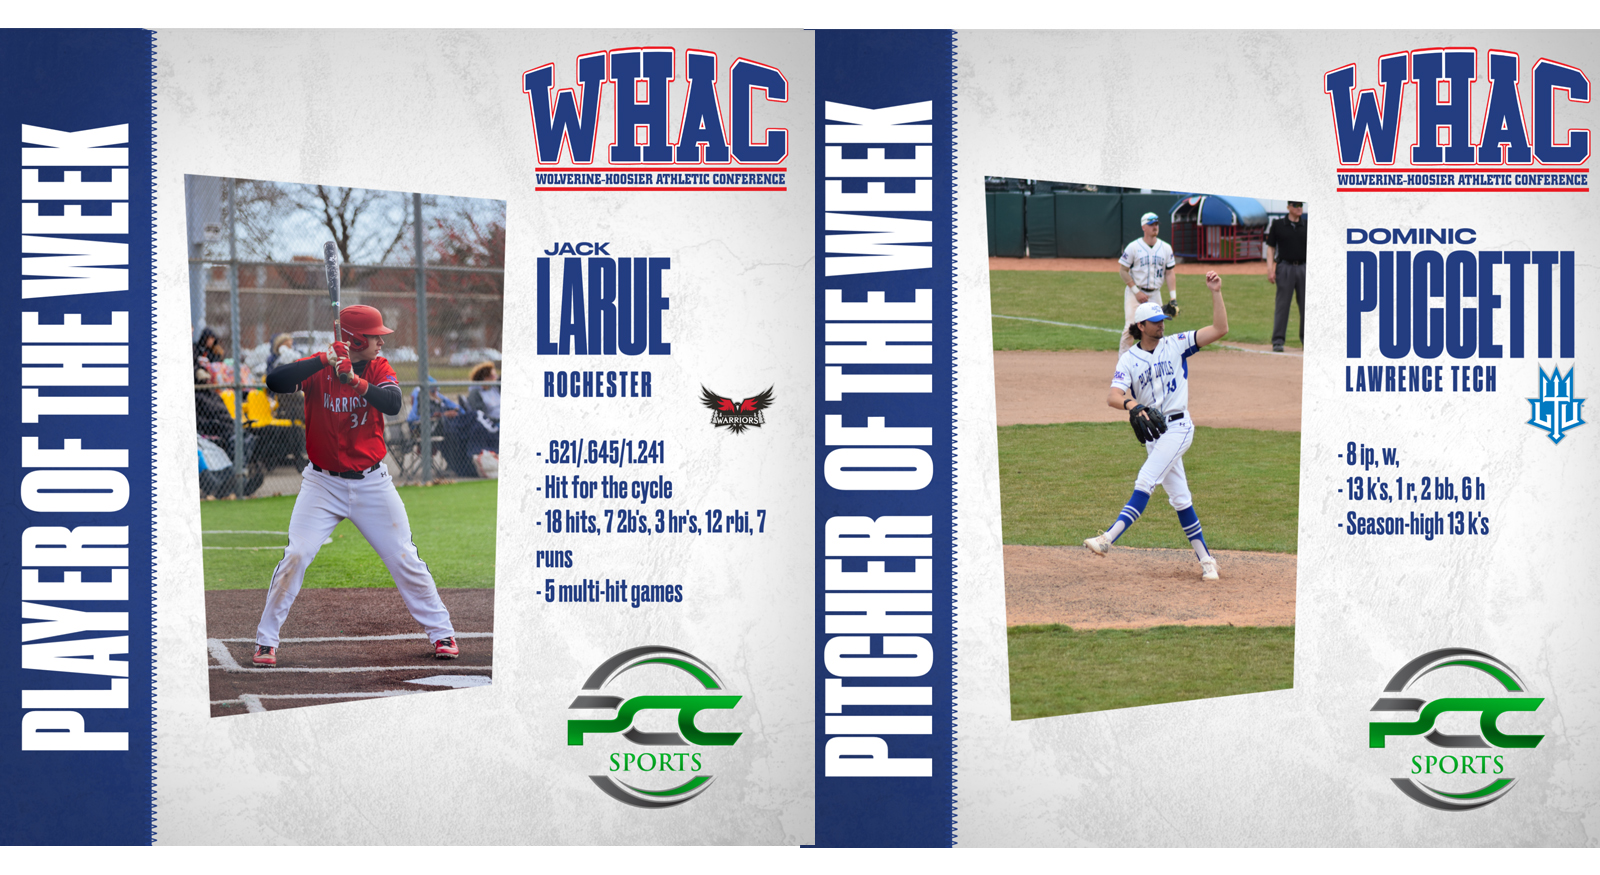 LaRue and Puccetti Earn Player of the Week Honors